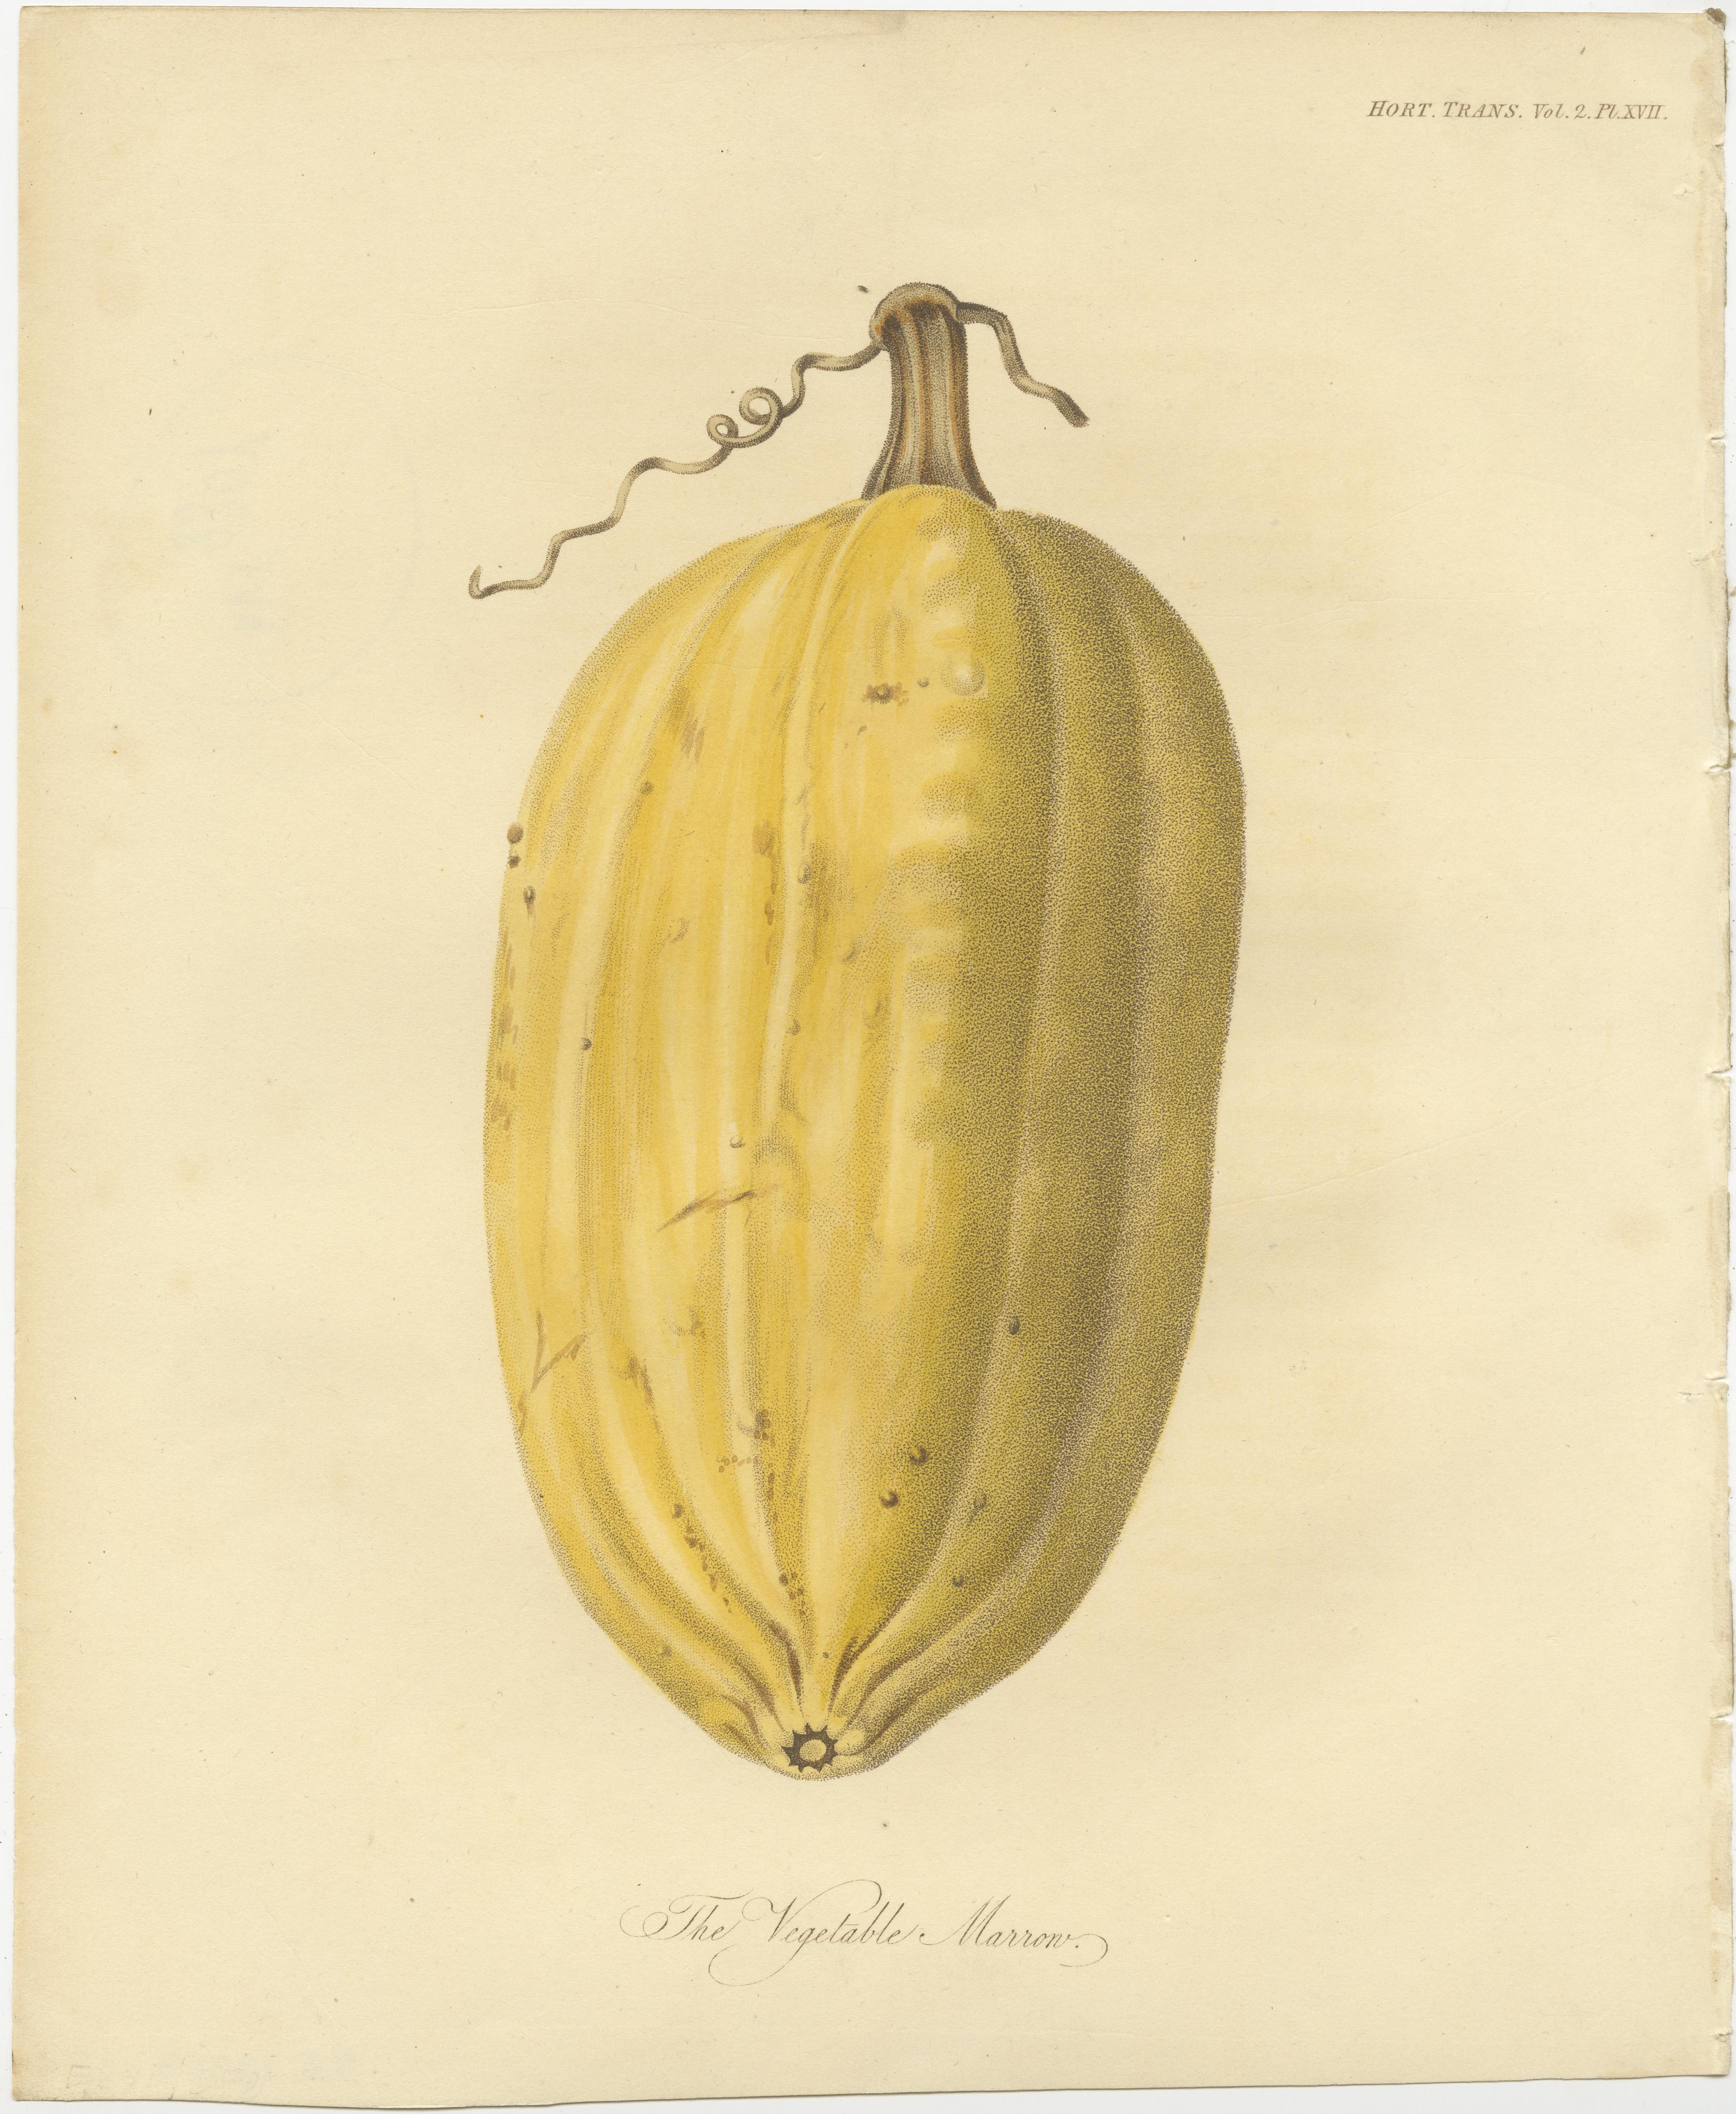 Antique print titled 'The Vegetable Marrow'. This print originates from 'Transactions of the Horticultural Society of London' published circa 1835.

In Transactions of the Horticultural Society of London we find some of the most beautifully